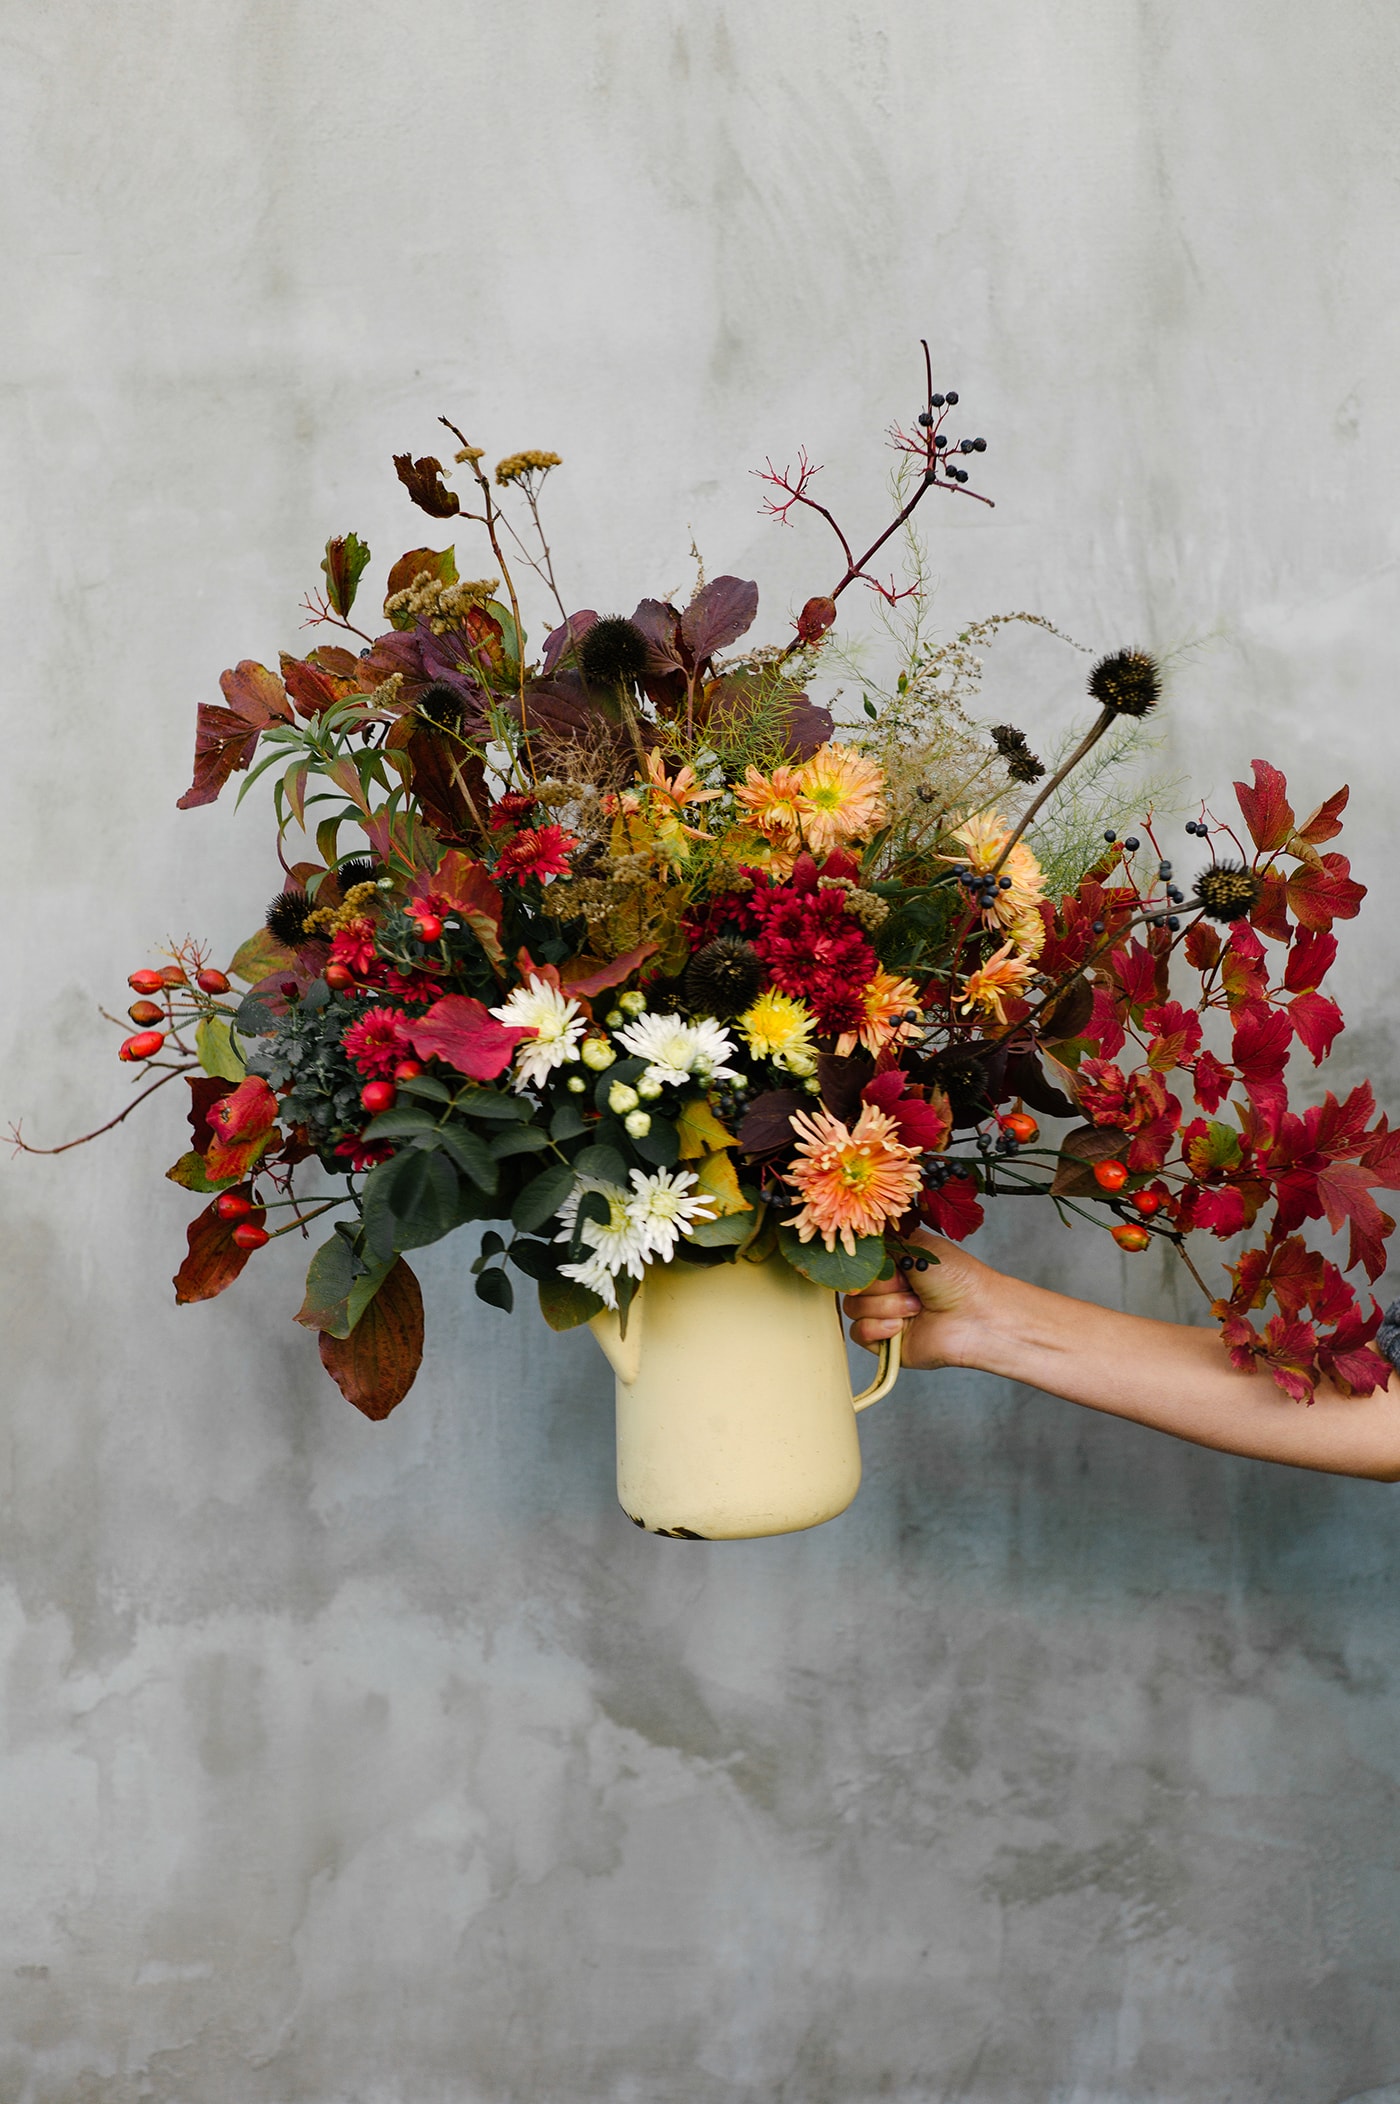 Hand holds a bouquet of autumn grasses, flowers and leaves on a gray wall background